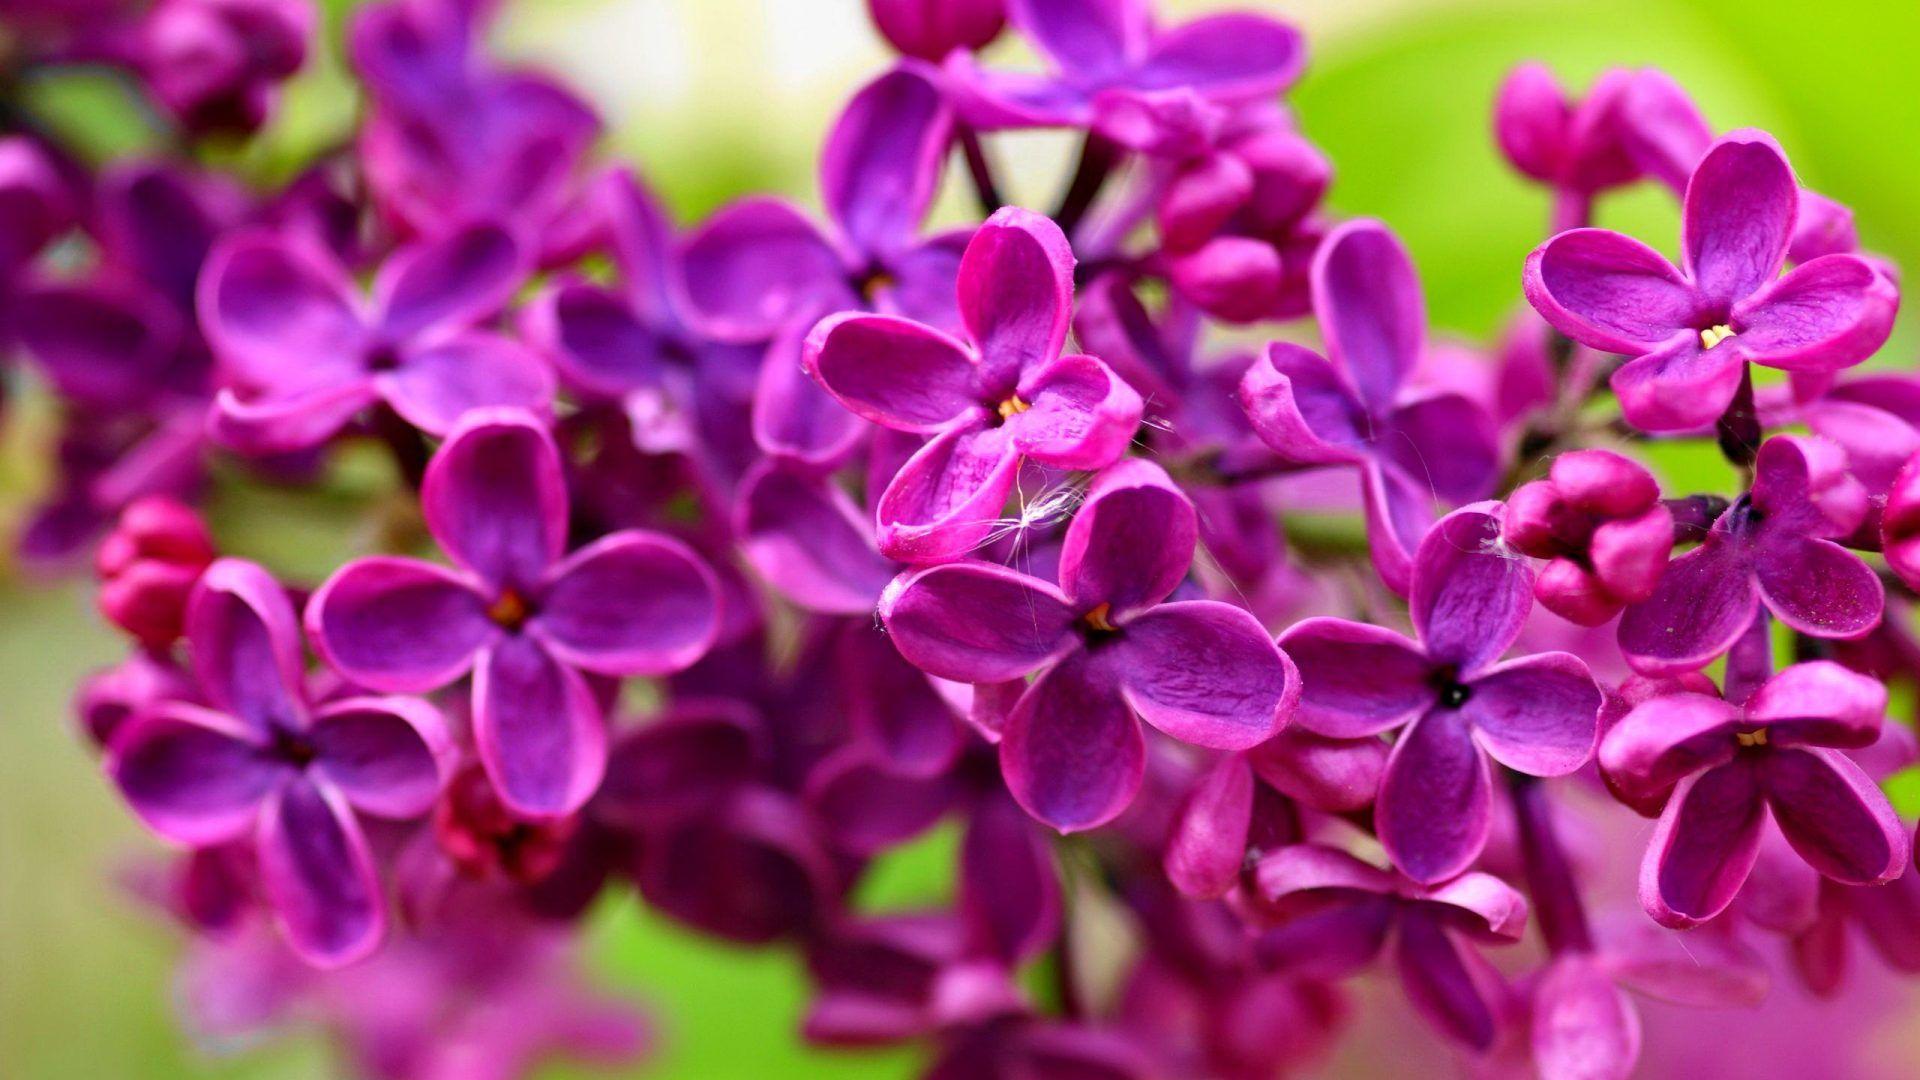 Lovely Lilac Fresh Colorful Flowers Fragrance Nice Tree Scent Nature